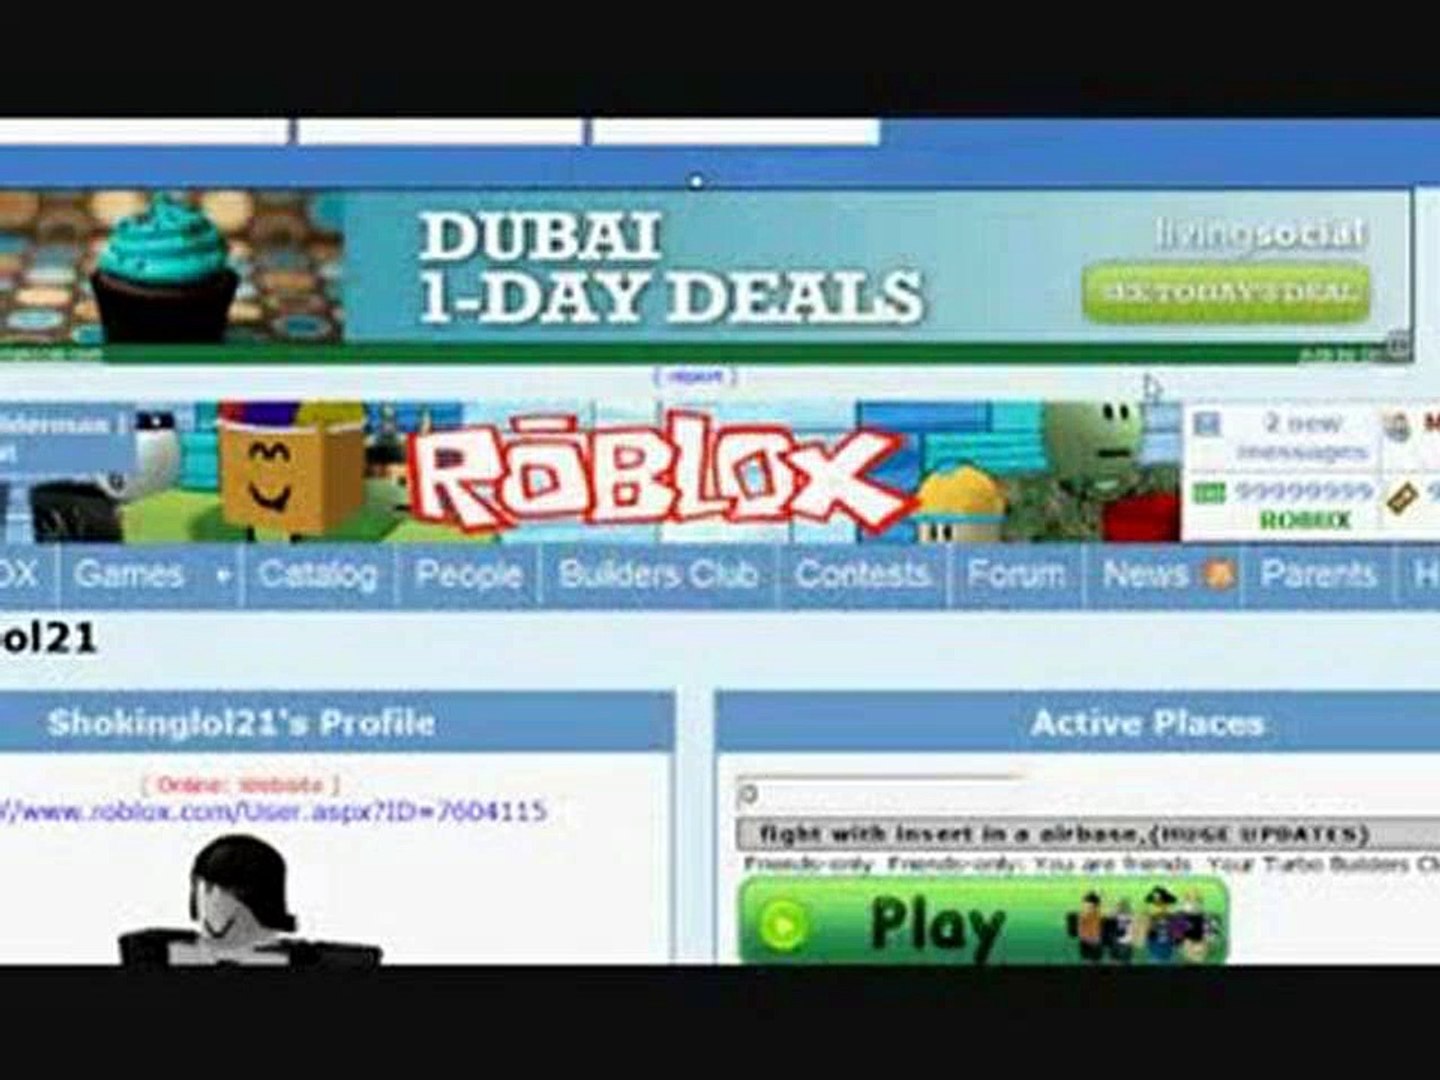 Roblox Robux Generator December 2014 No Surveys No Viruses Updated Video Dailymotion - roblox robux hack 2014 december